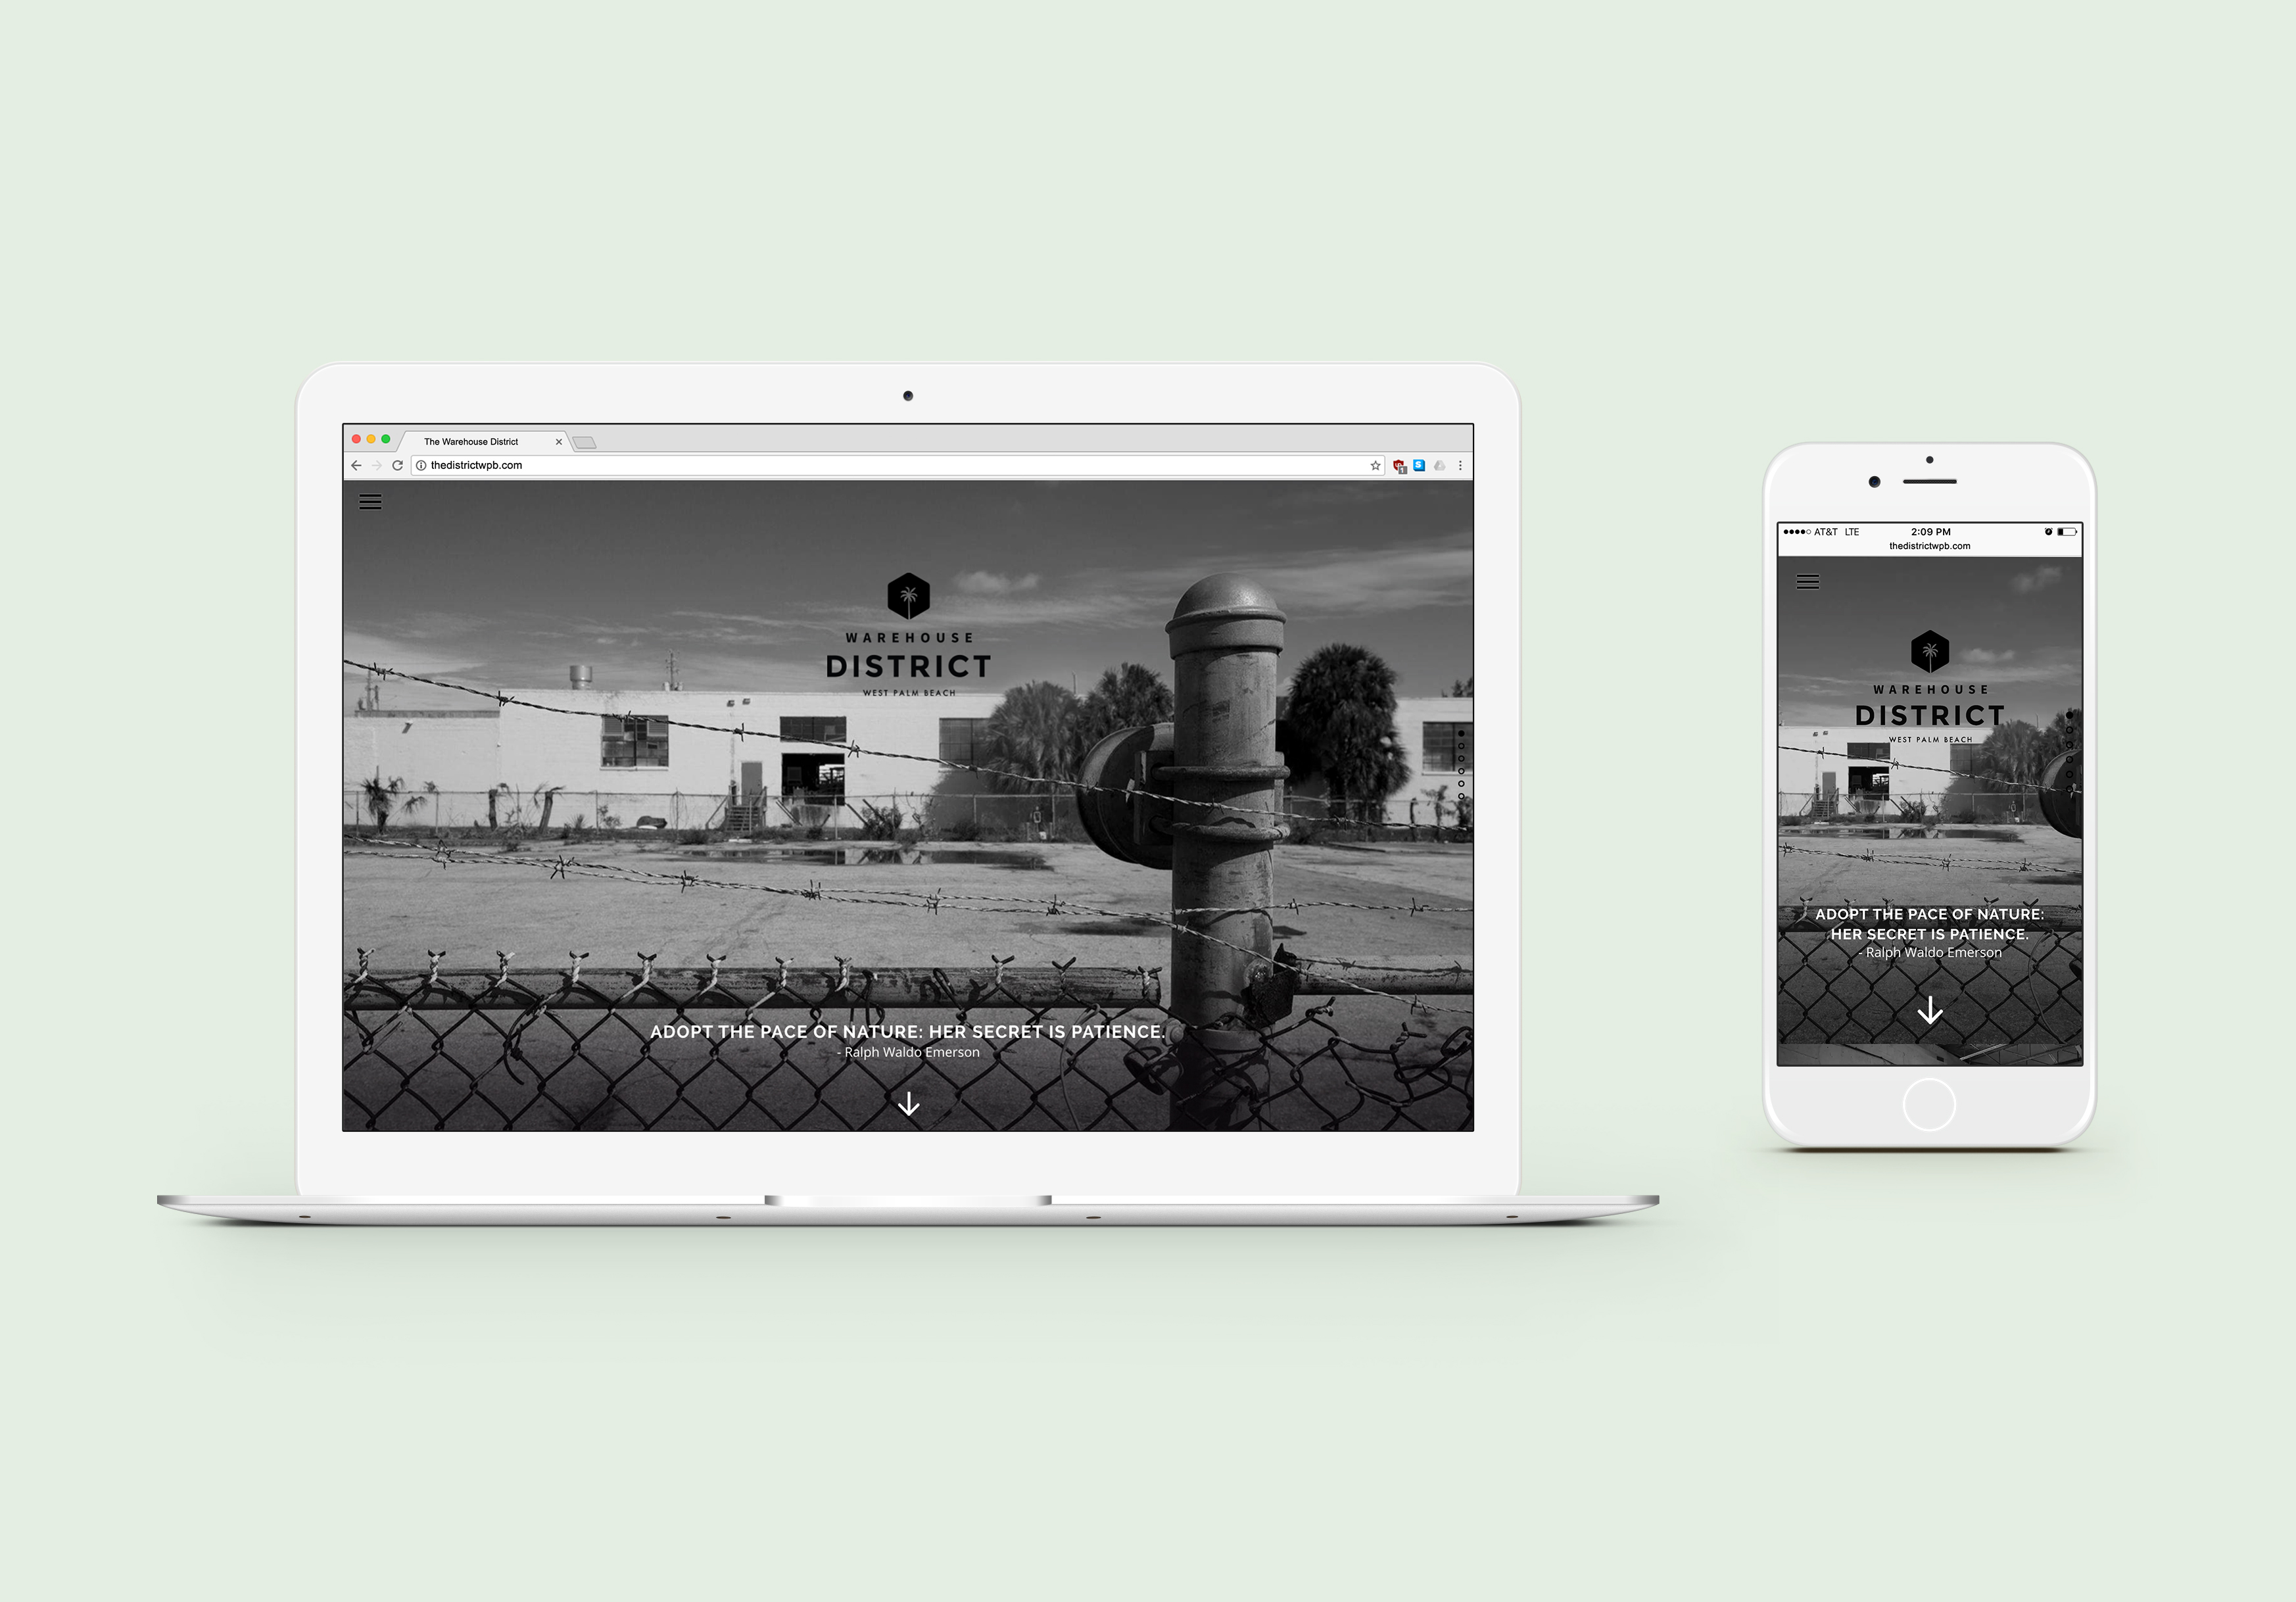 Large Display & Mobile Website mockups with the Warehouse District logo overtop a black & white photo of the warehouses. White type at the bottom reads Adopt the Pace of Nature: Her Secret is Patience - Ralph Waldo Emerson